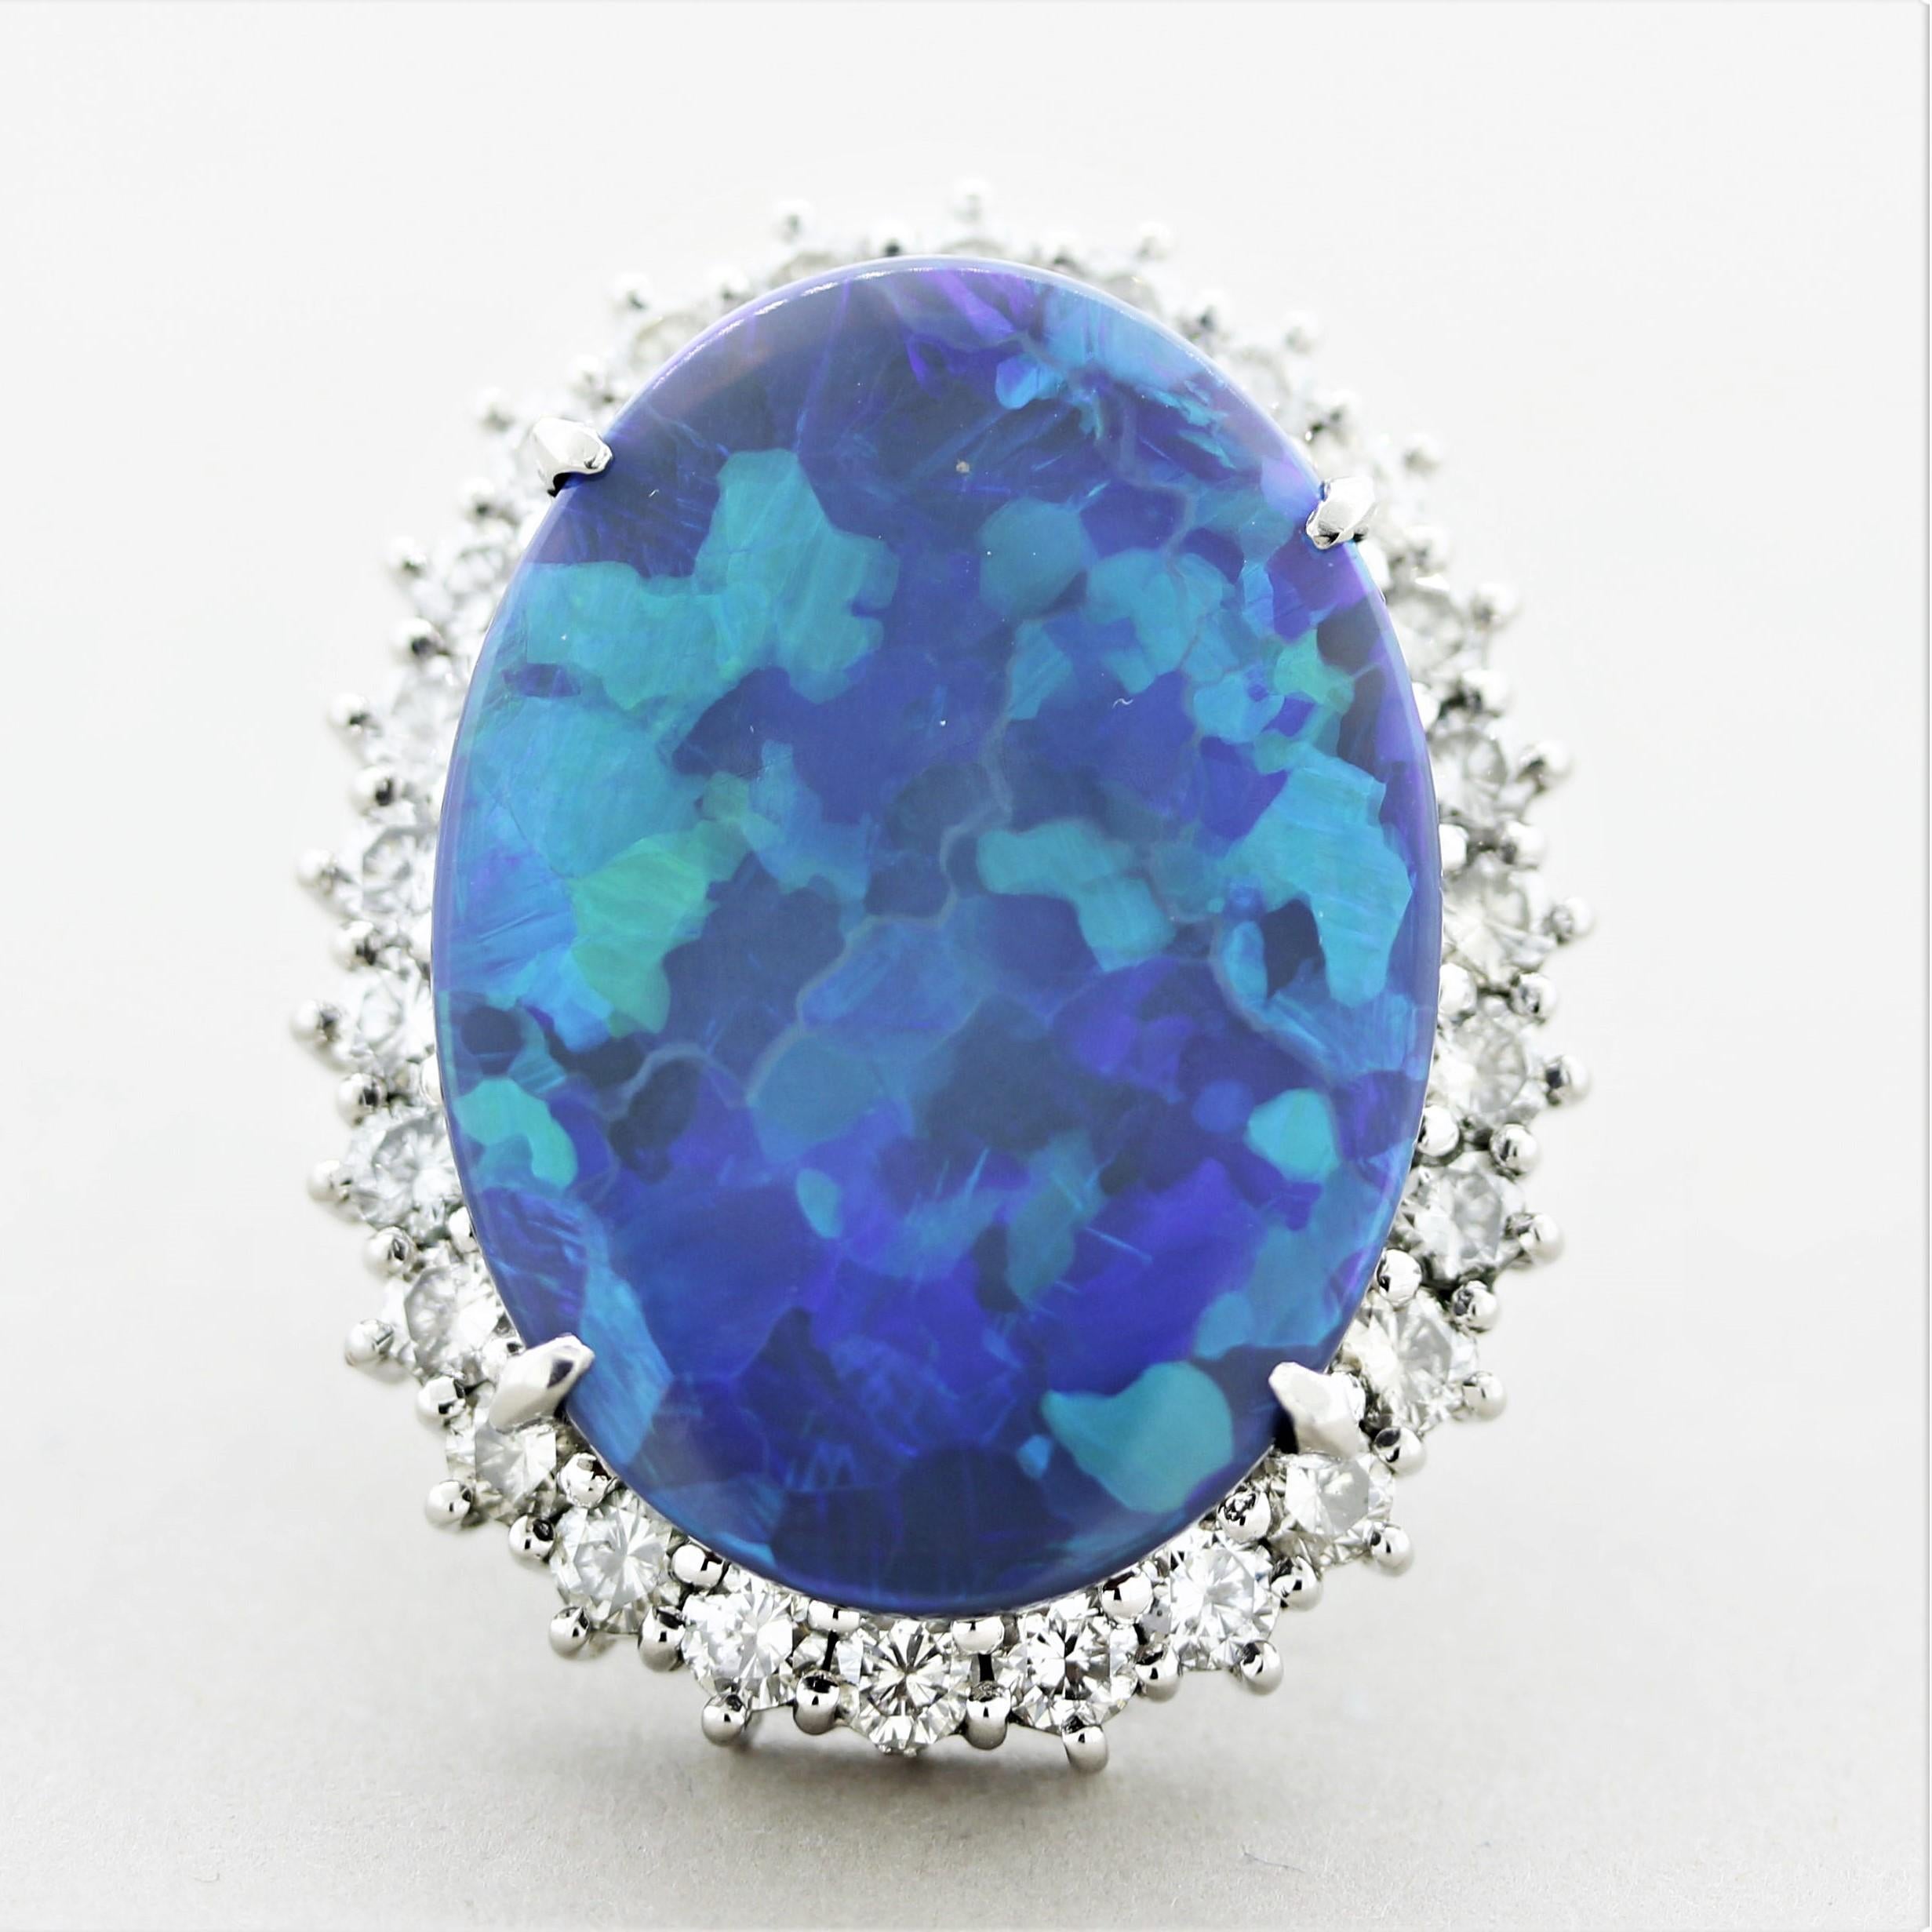 A large and exceptional black opal from Australia! It weighs in at a whopping 24.95 carats and has great play-of-color. Bright flashes of green and blue can be seen across the opal over its dark black body color. It is accented by 4.10 carats of